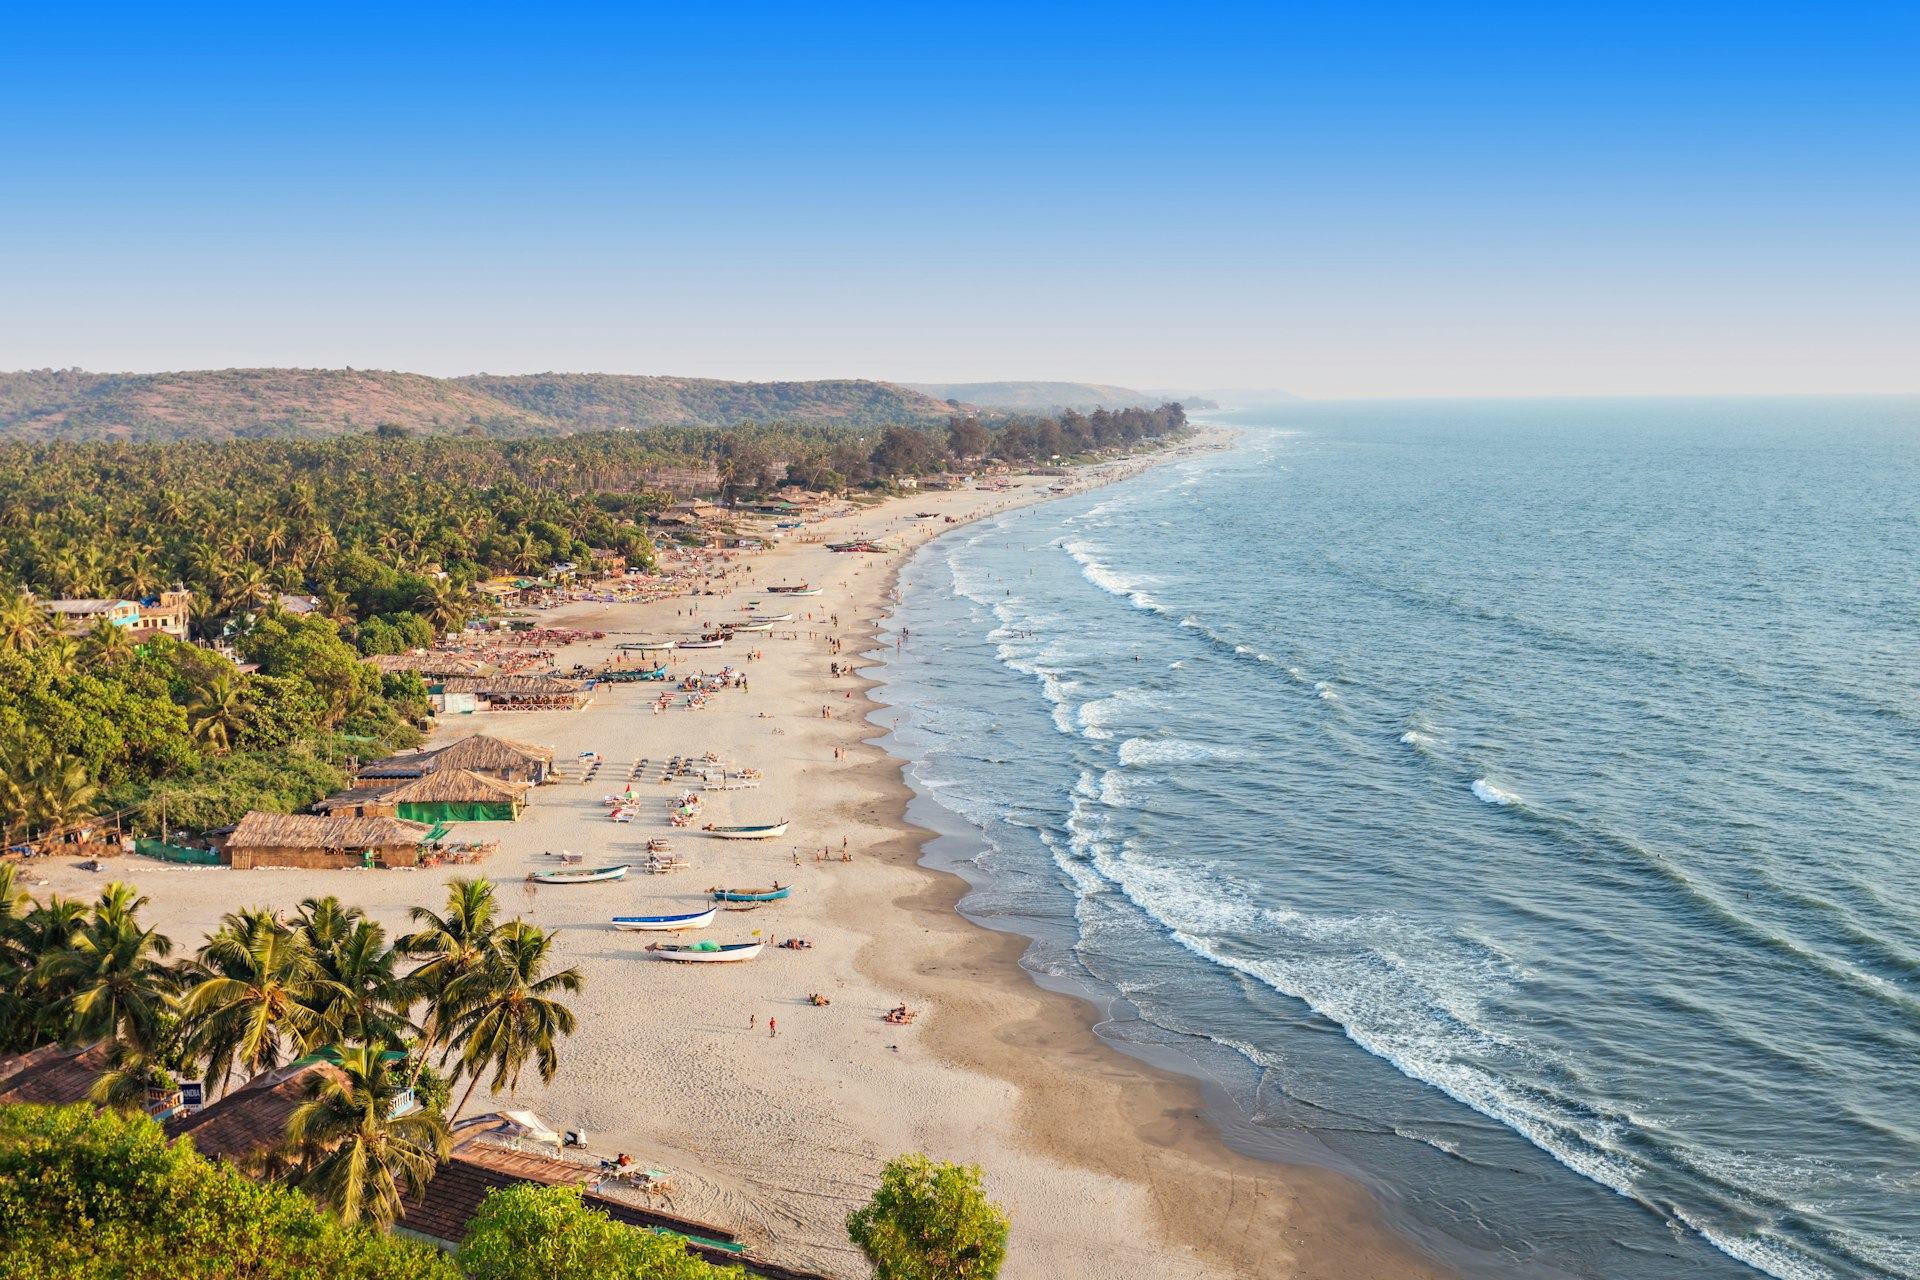 High-angle view of Arambol beach: a white stretch of sand being lapped by waves and backed by palm tress. On the sand a number of people sunbathe and a handful of colorful fishing boats also line the shore.